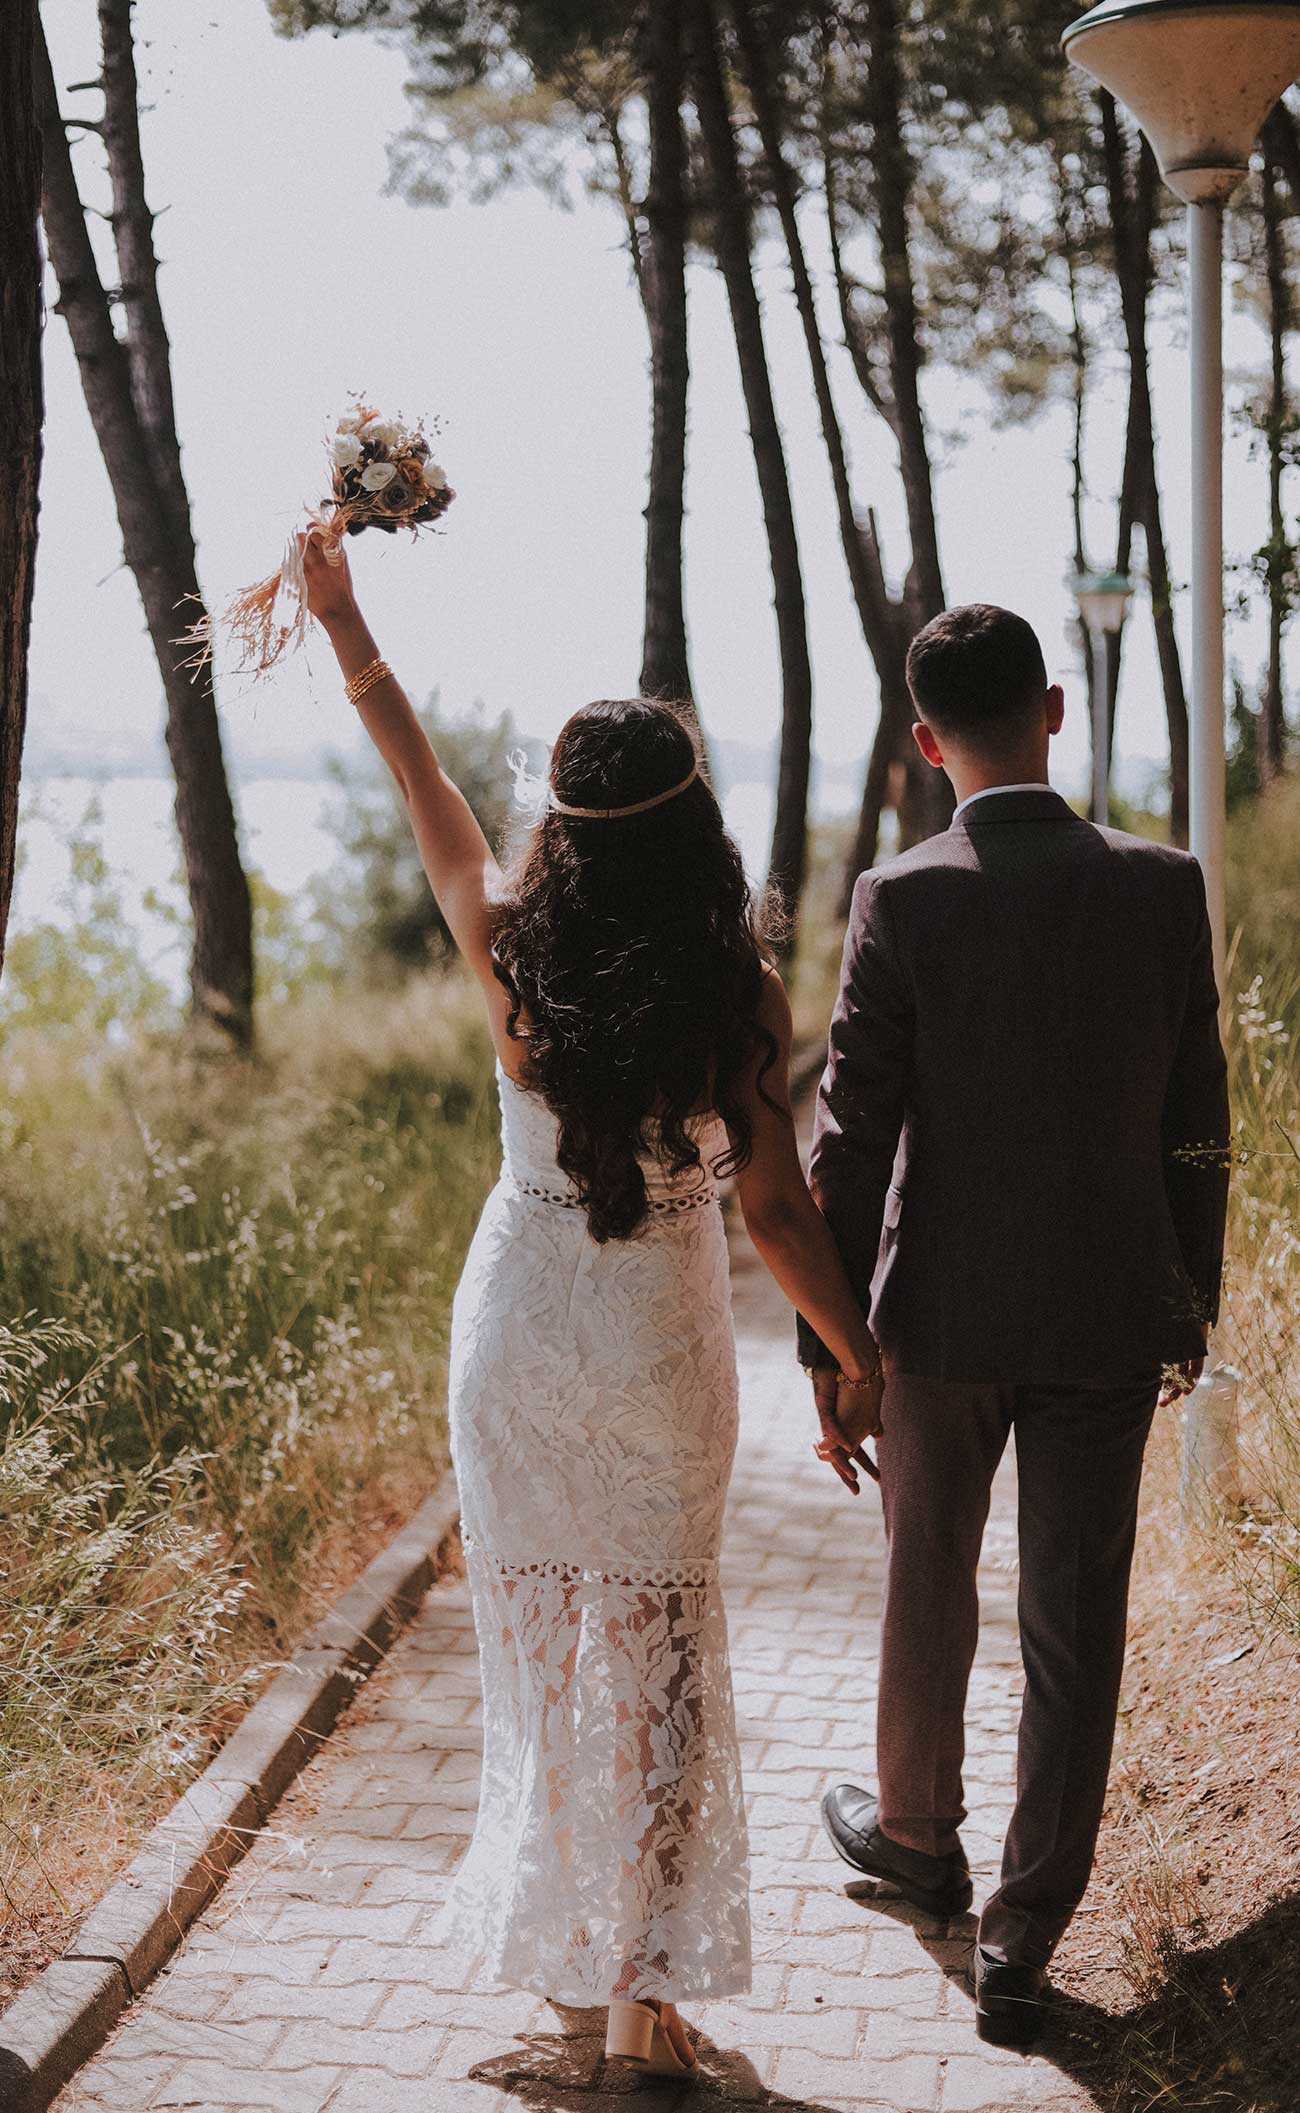 A bride and groom walking down the path of a forest.